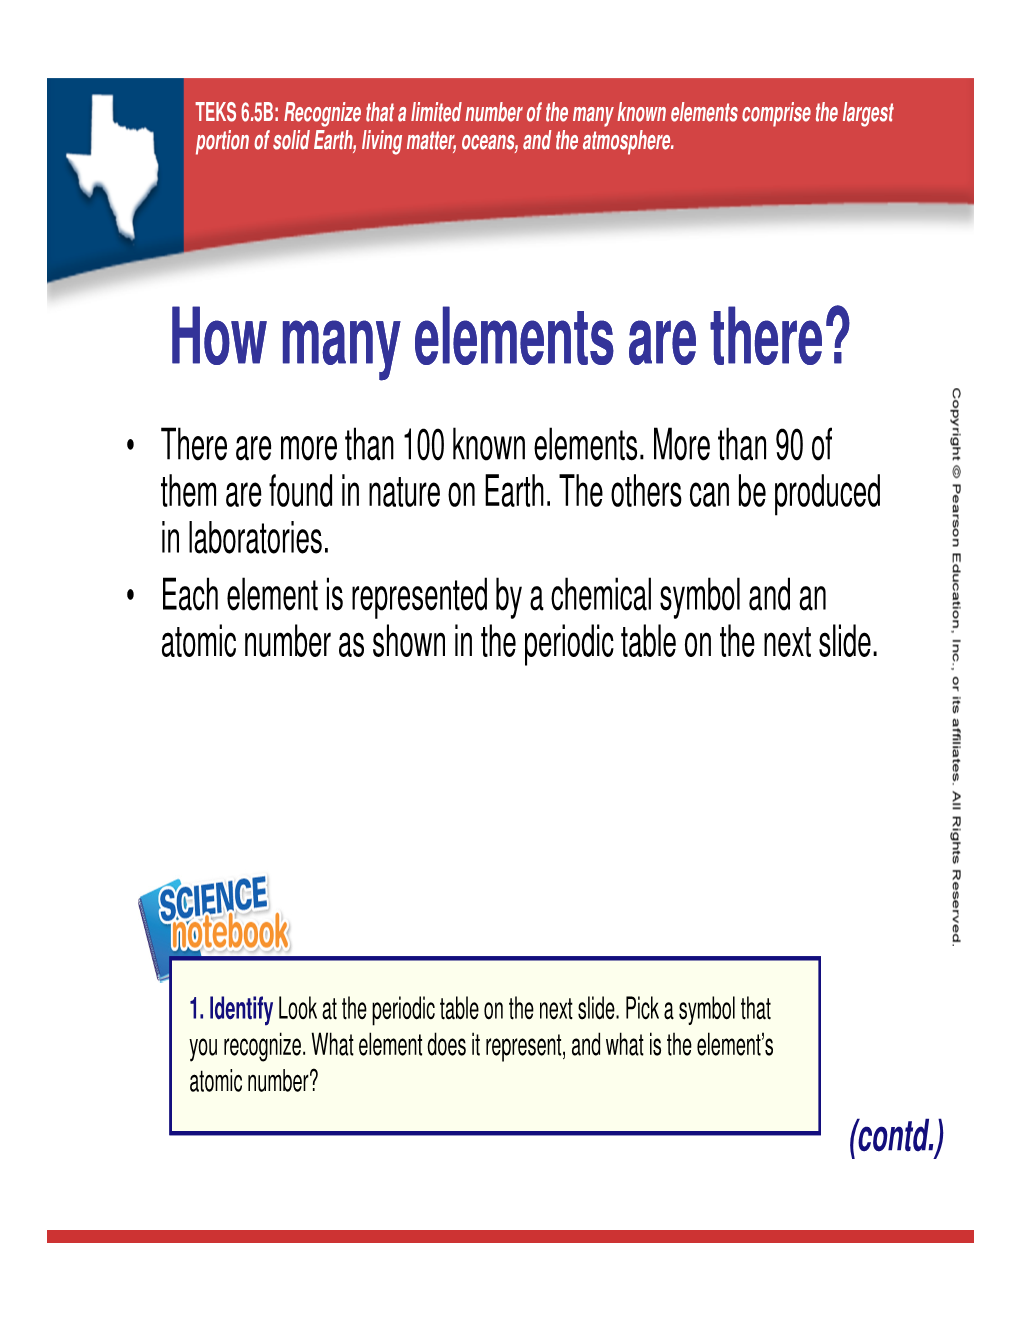 How Many Elements Are There?